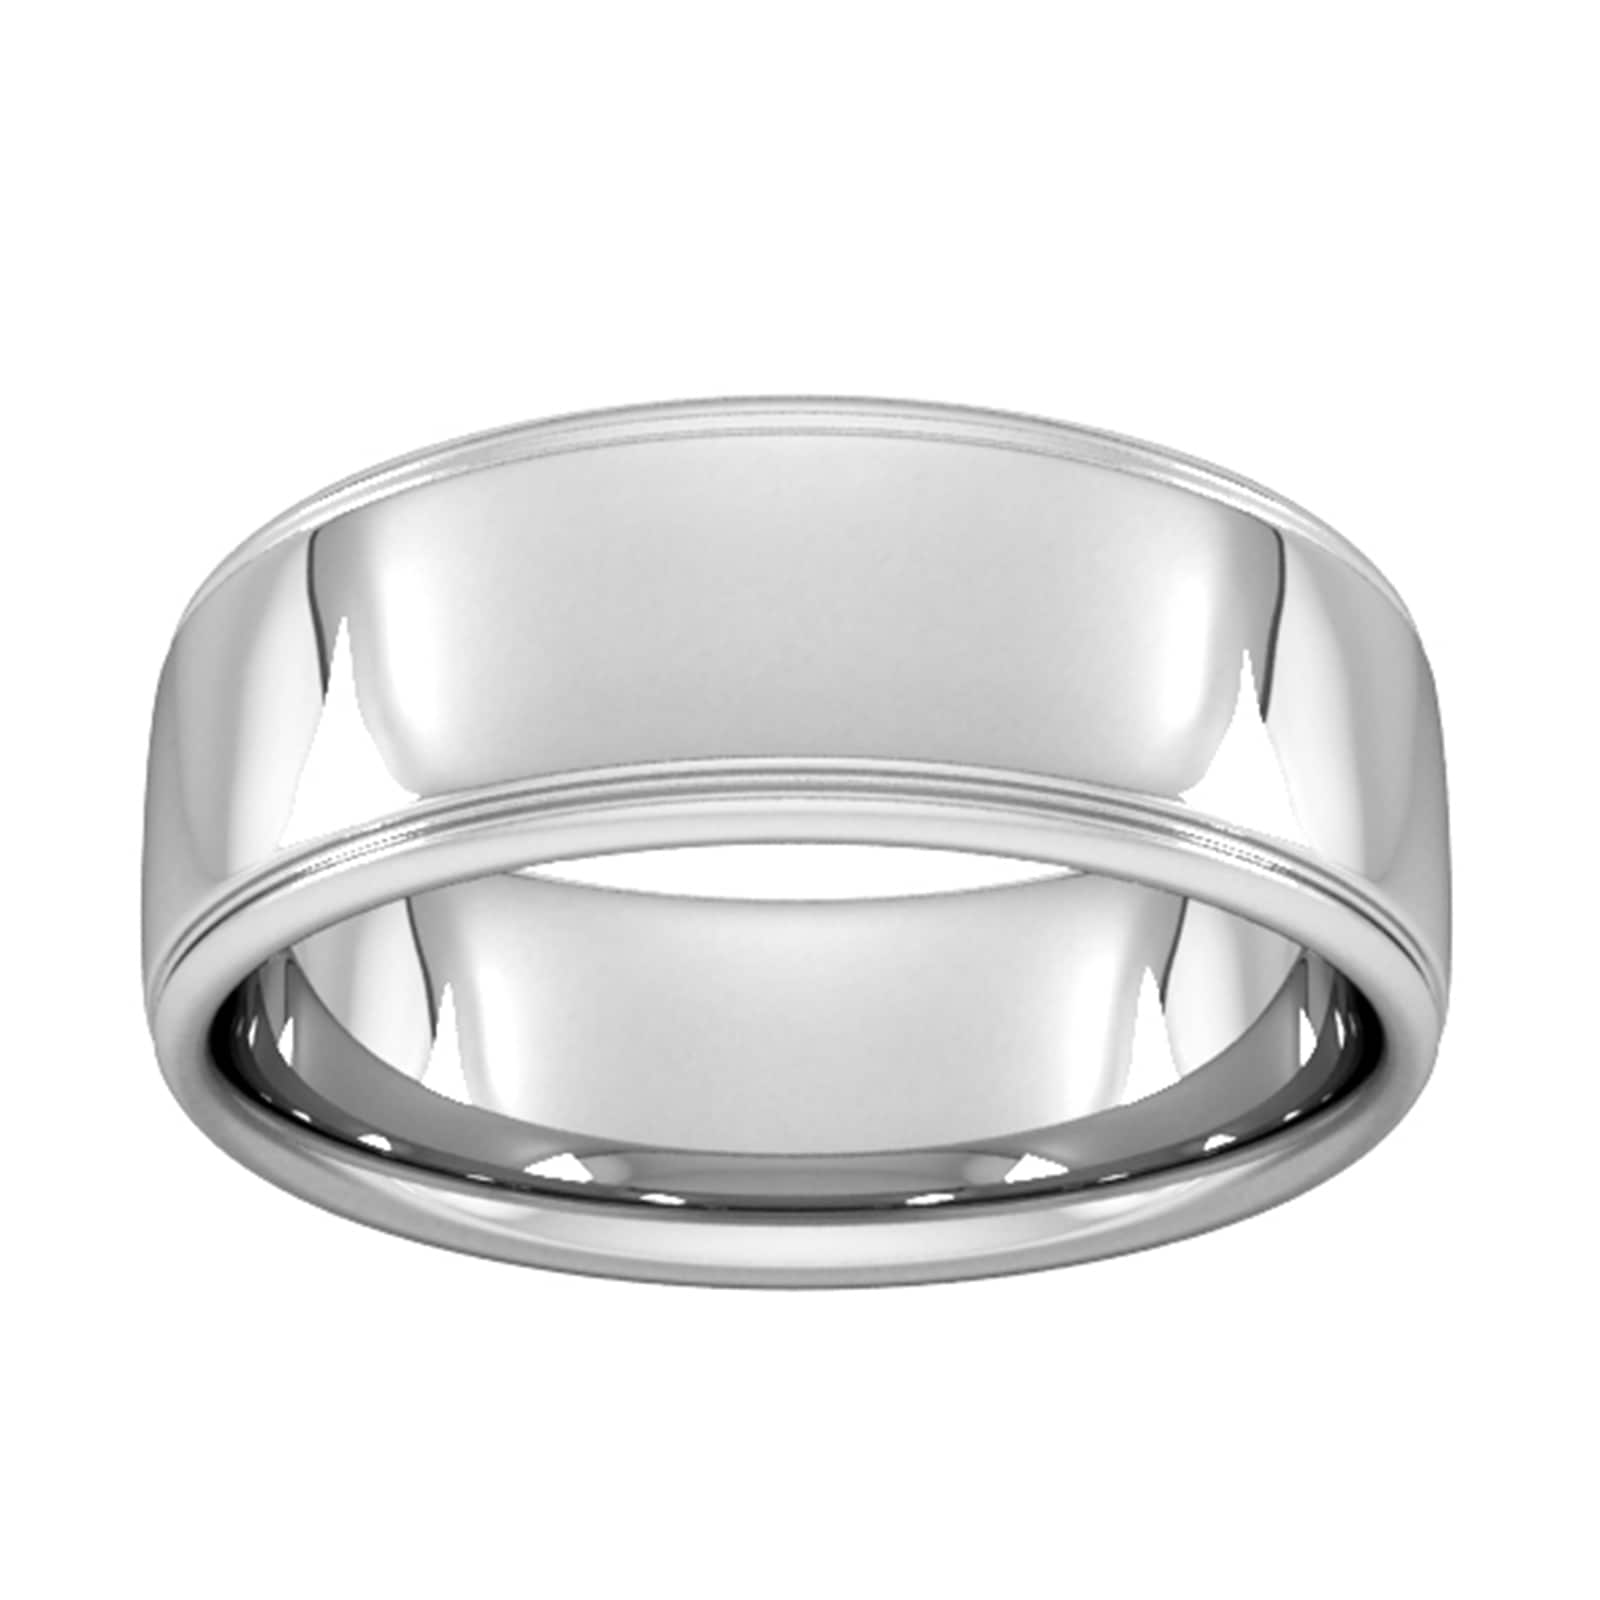 8mm Slight Court Heavy Polished Finish With Grooves Wedding Ring In 18 Carat White Gold - Ring Size Y